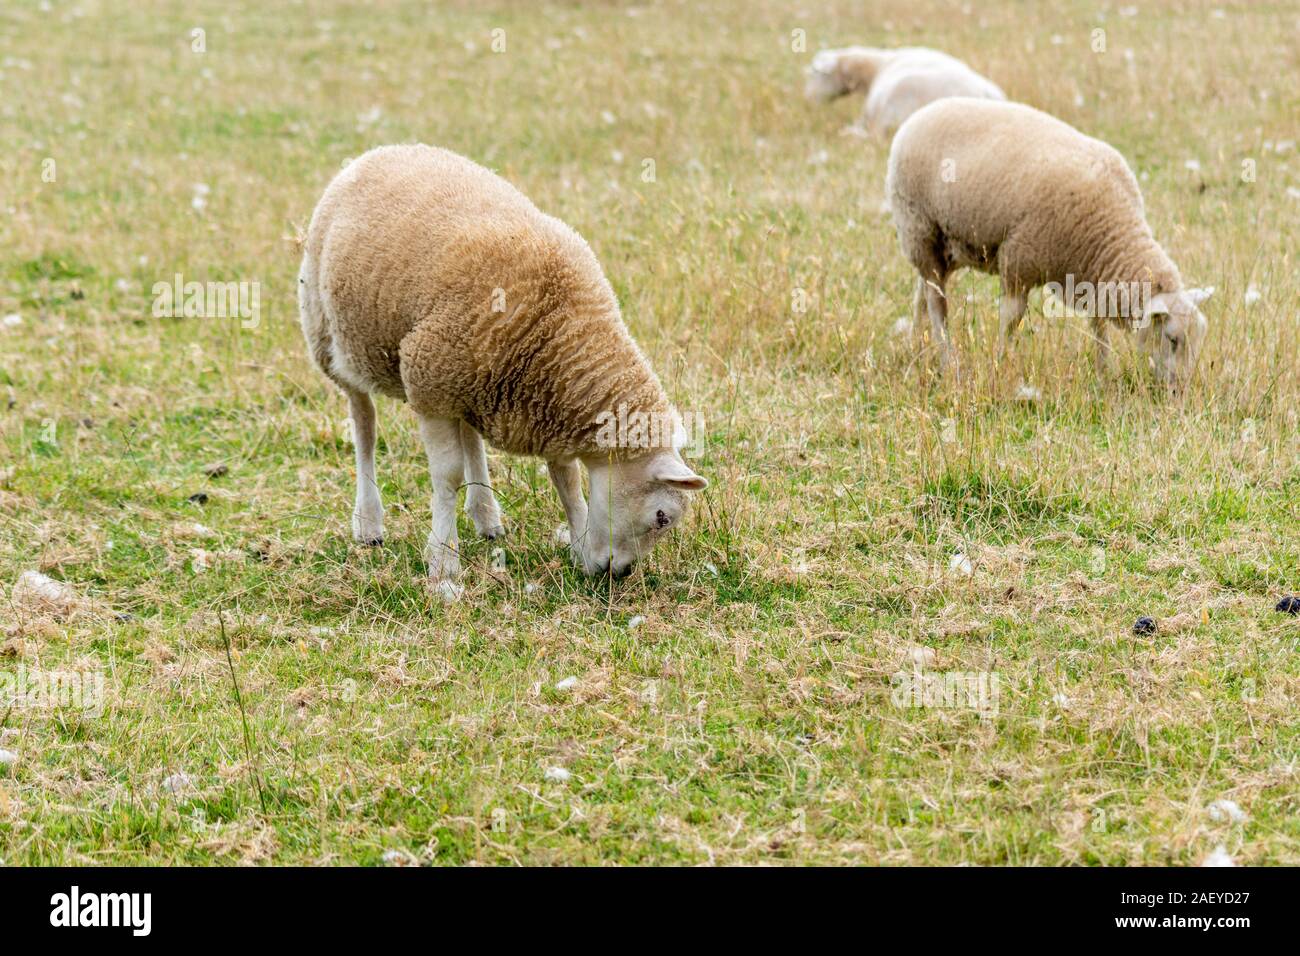 Sheep with their heads down grazing in wild pasture with bits of shed wool and dried grass well scattered around Stock Photo